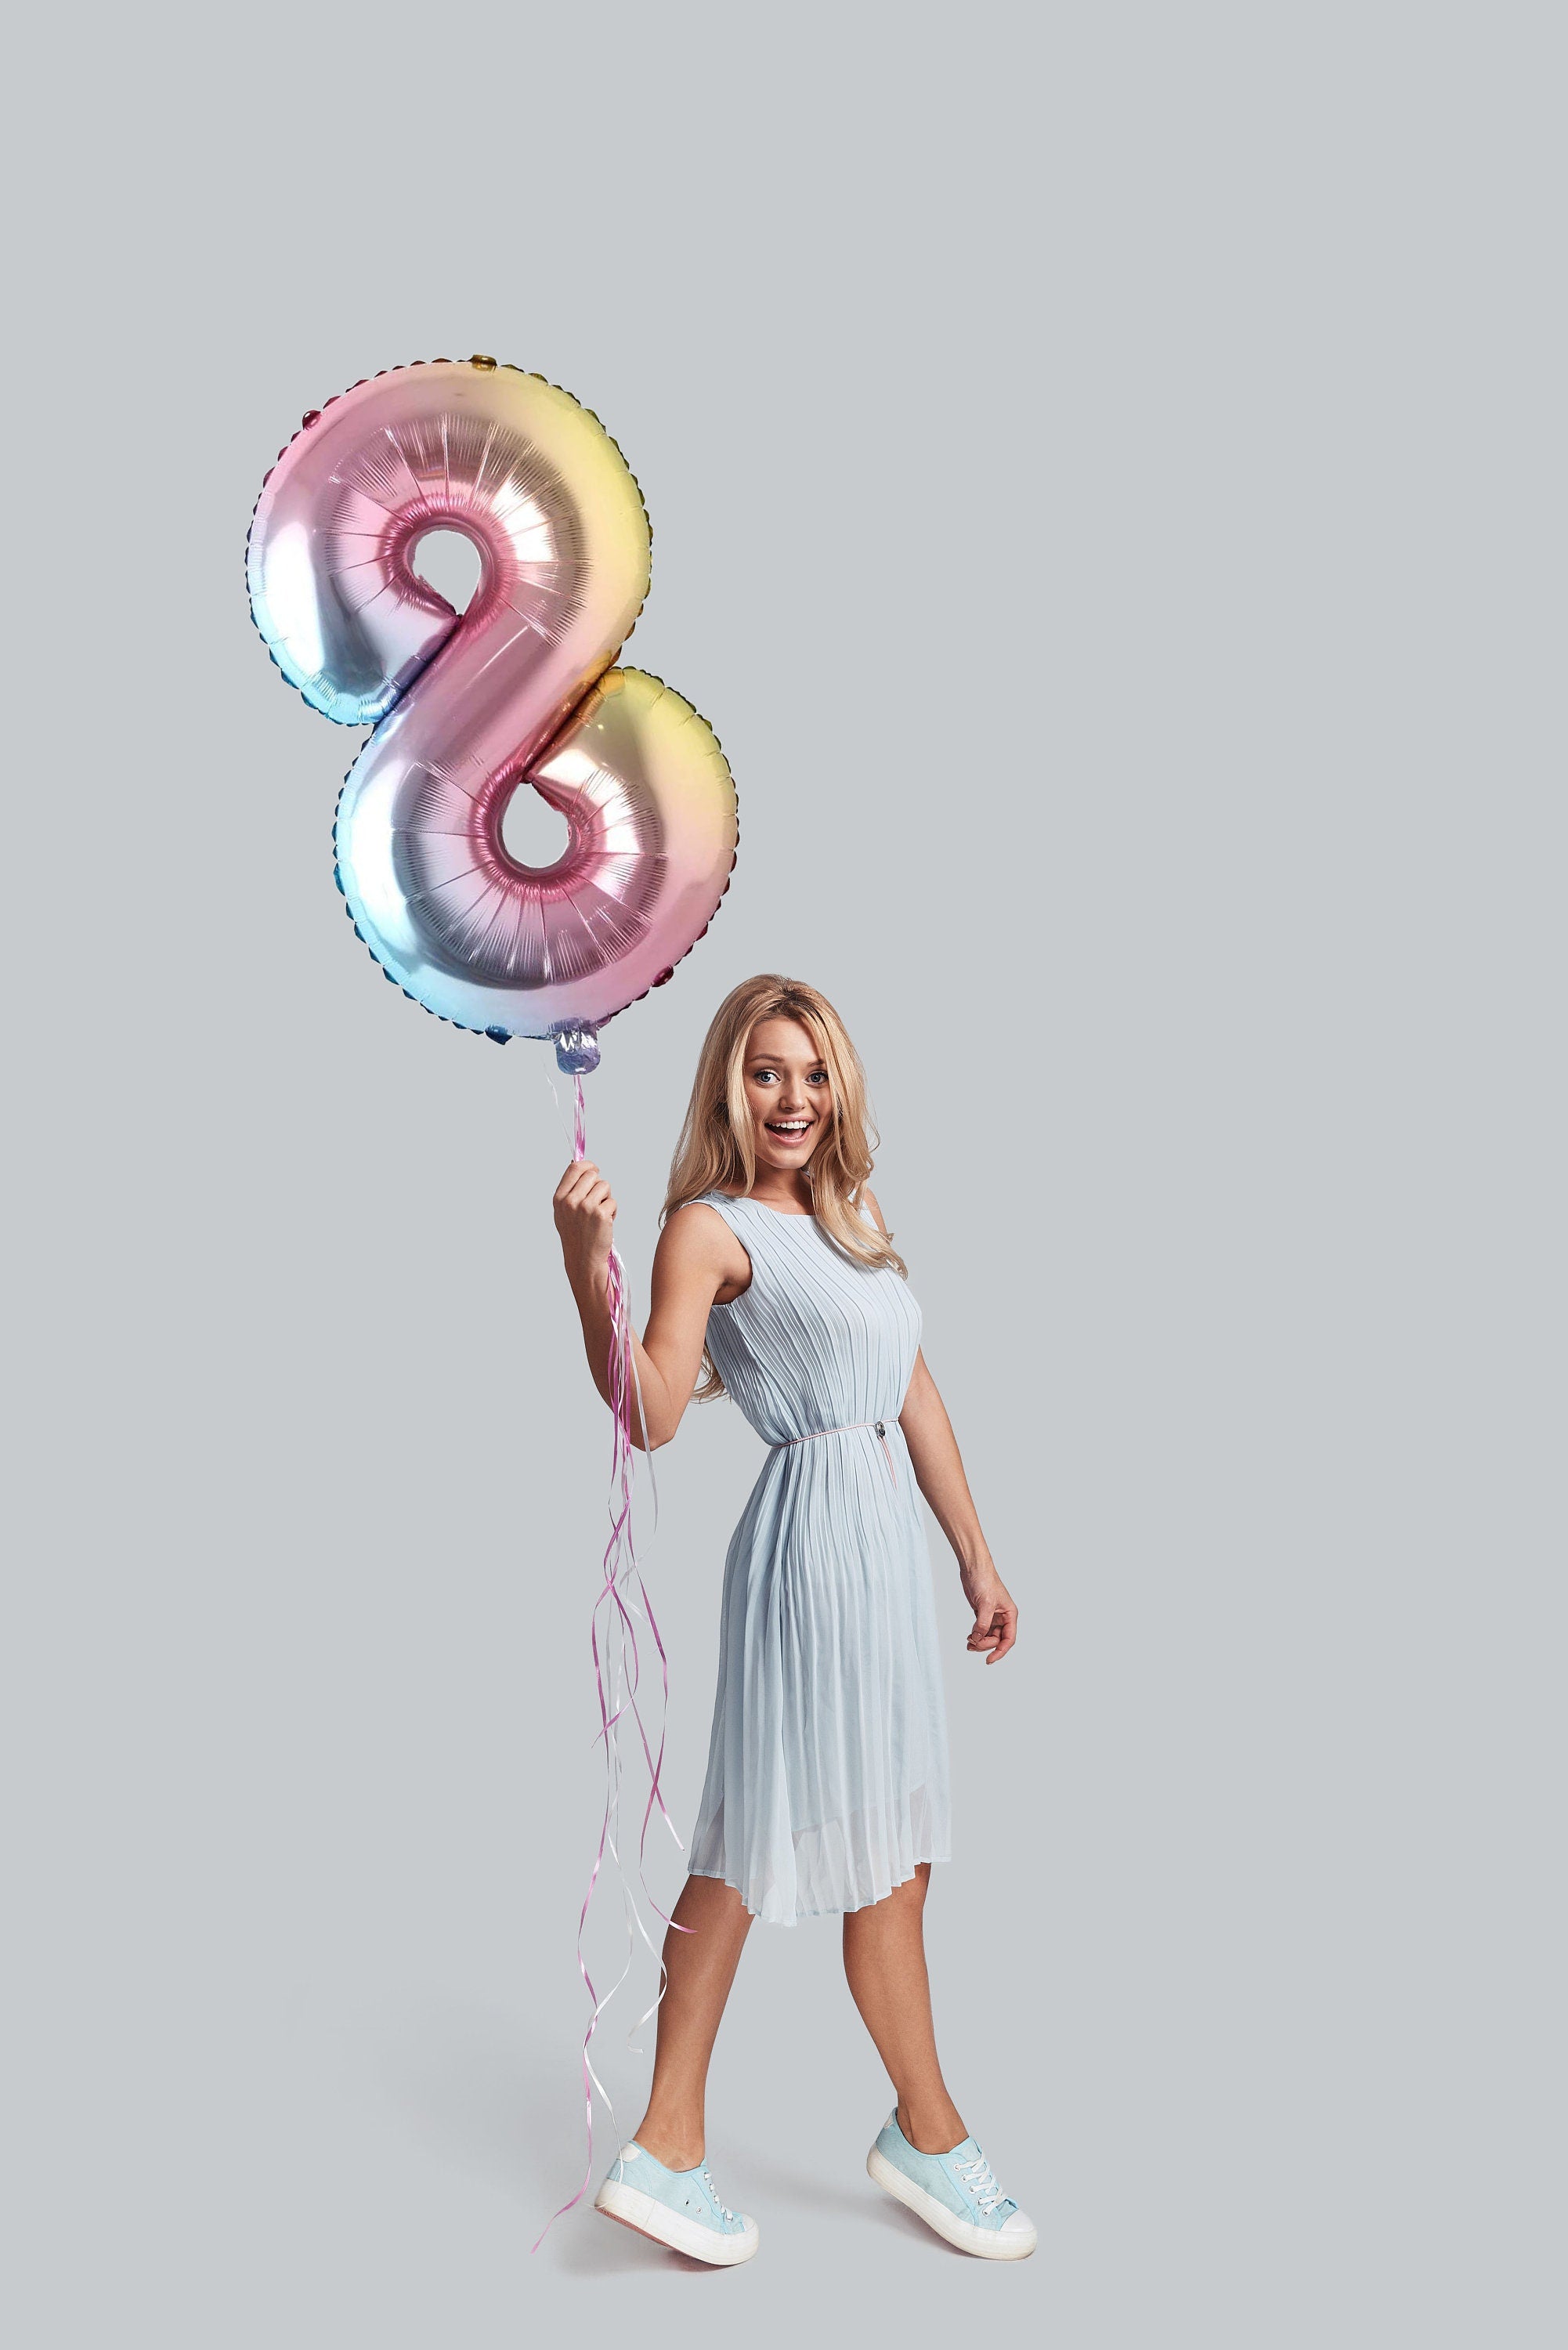 32 Inch Foil Holographic Number Eight Shaped Balloon - Eight Years of Shimmering Celebrations!